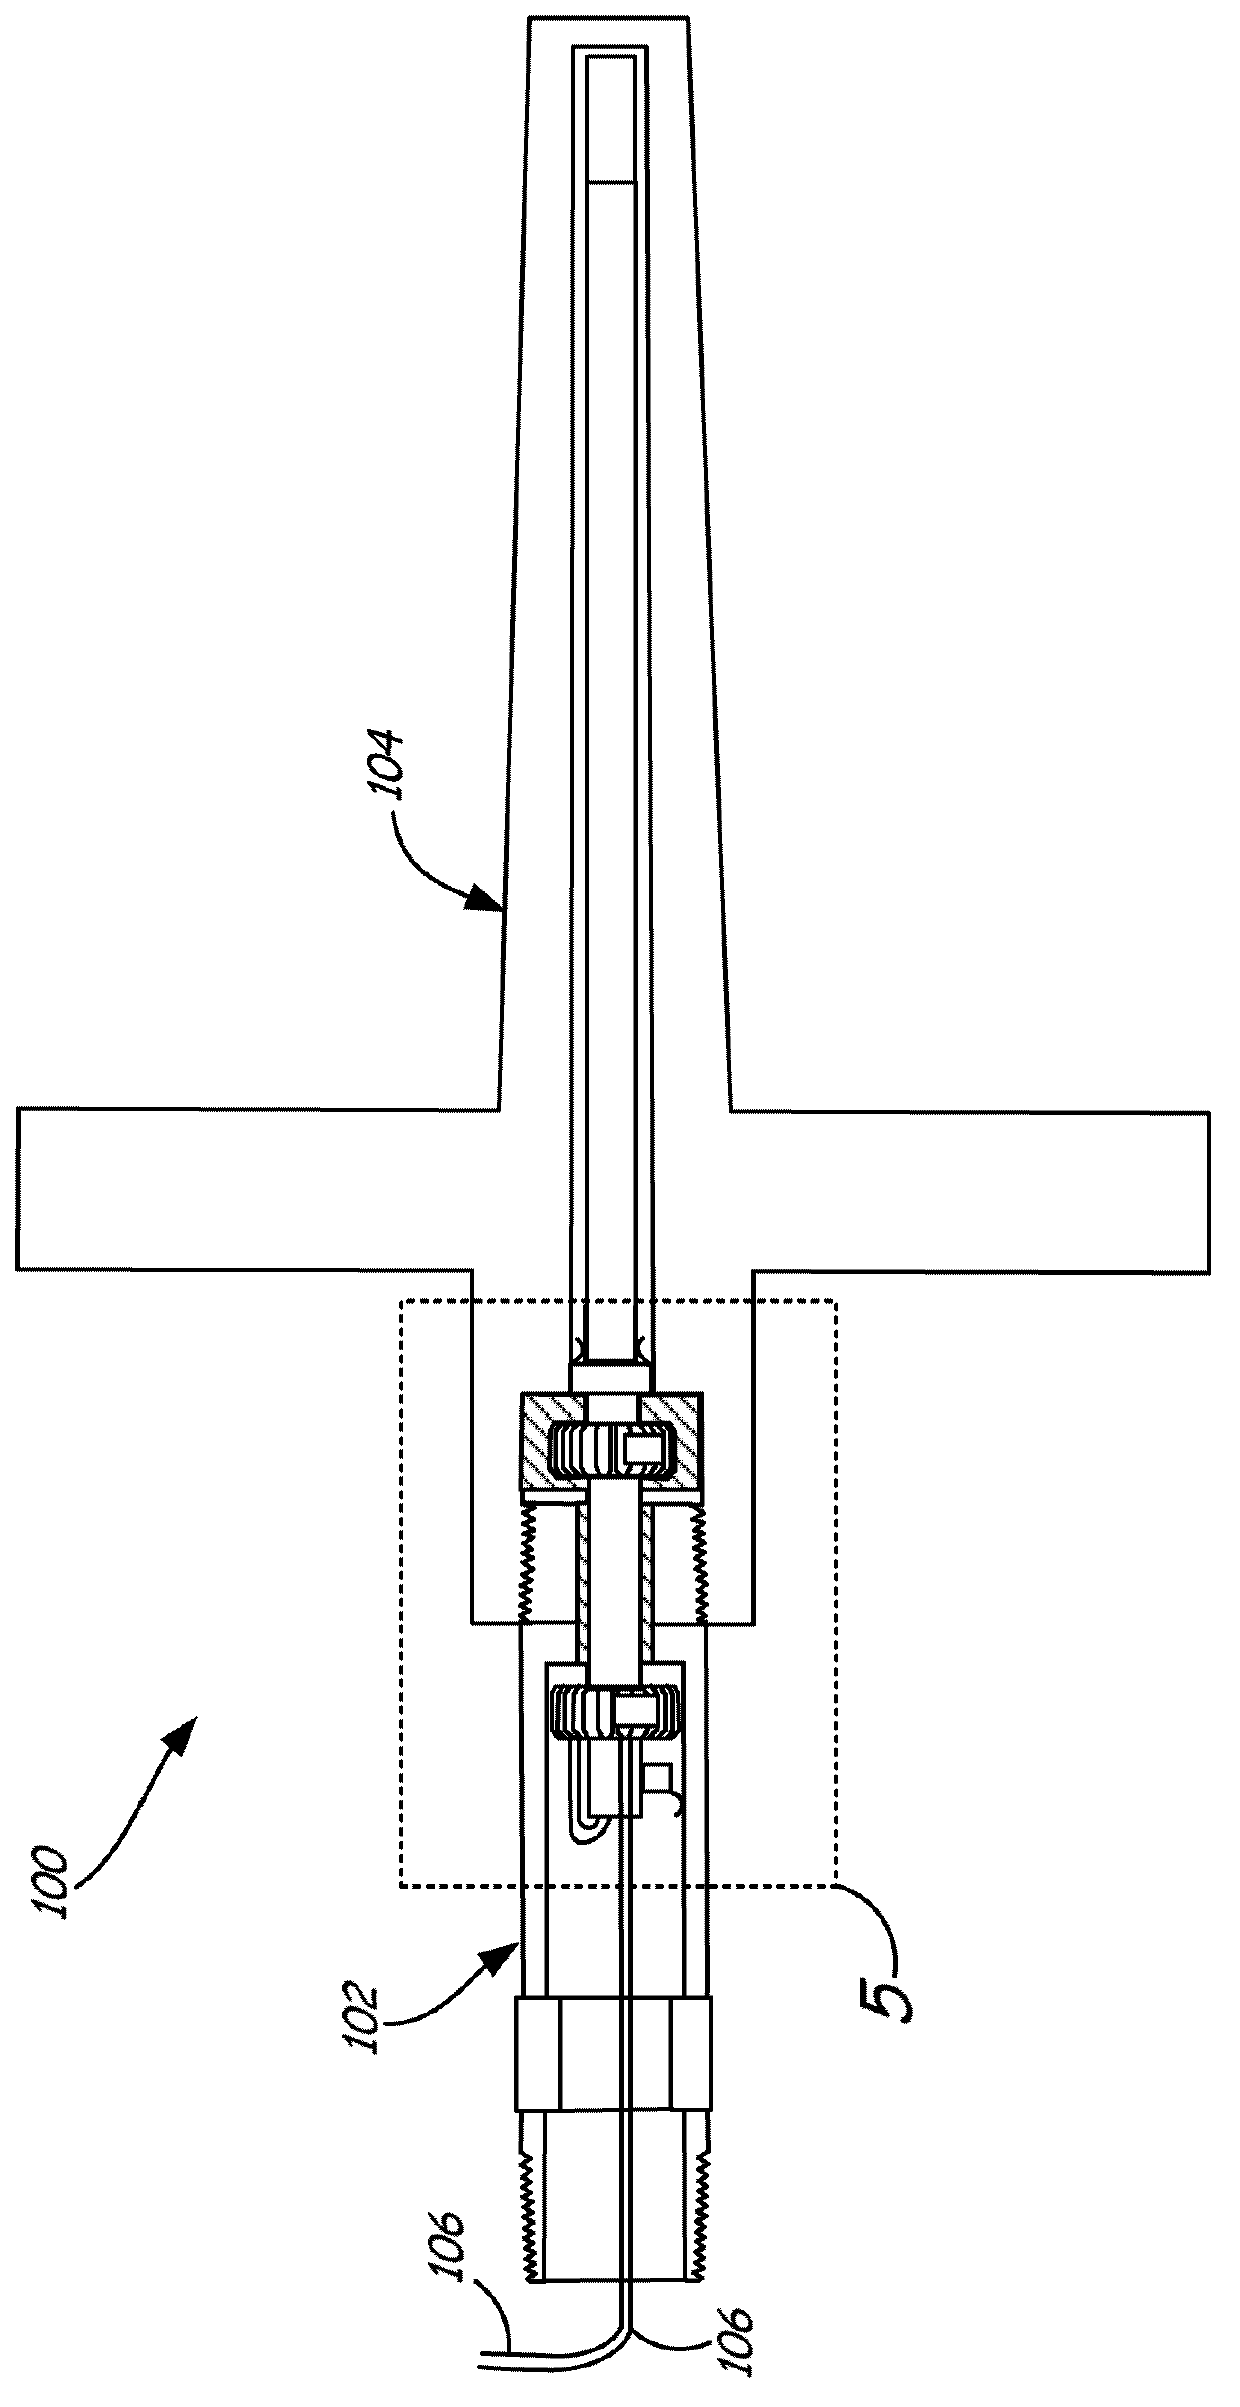 Plug-and-play sensor peripheral component for process instrumentation